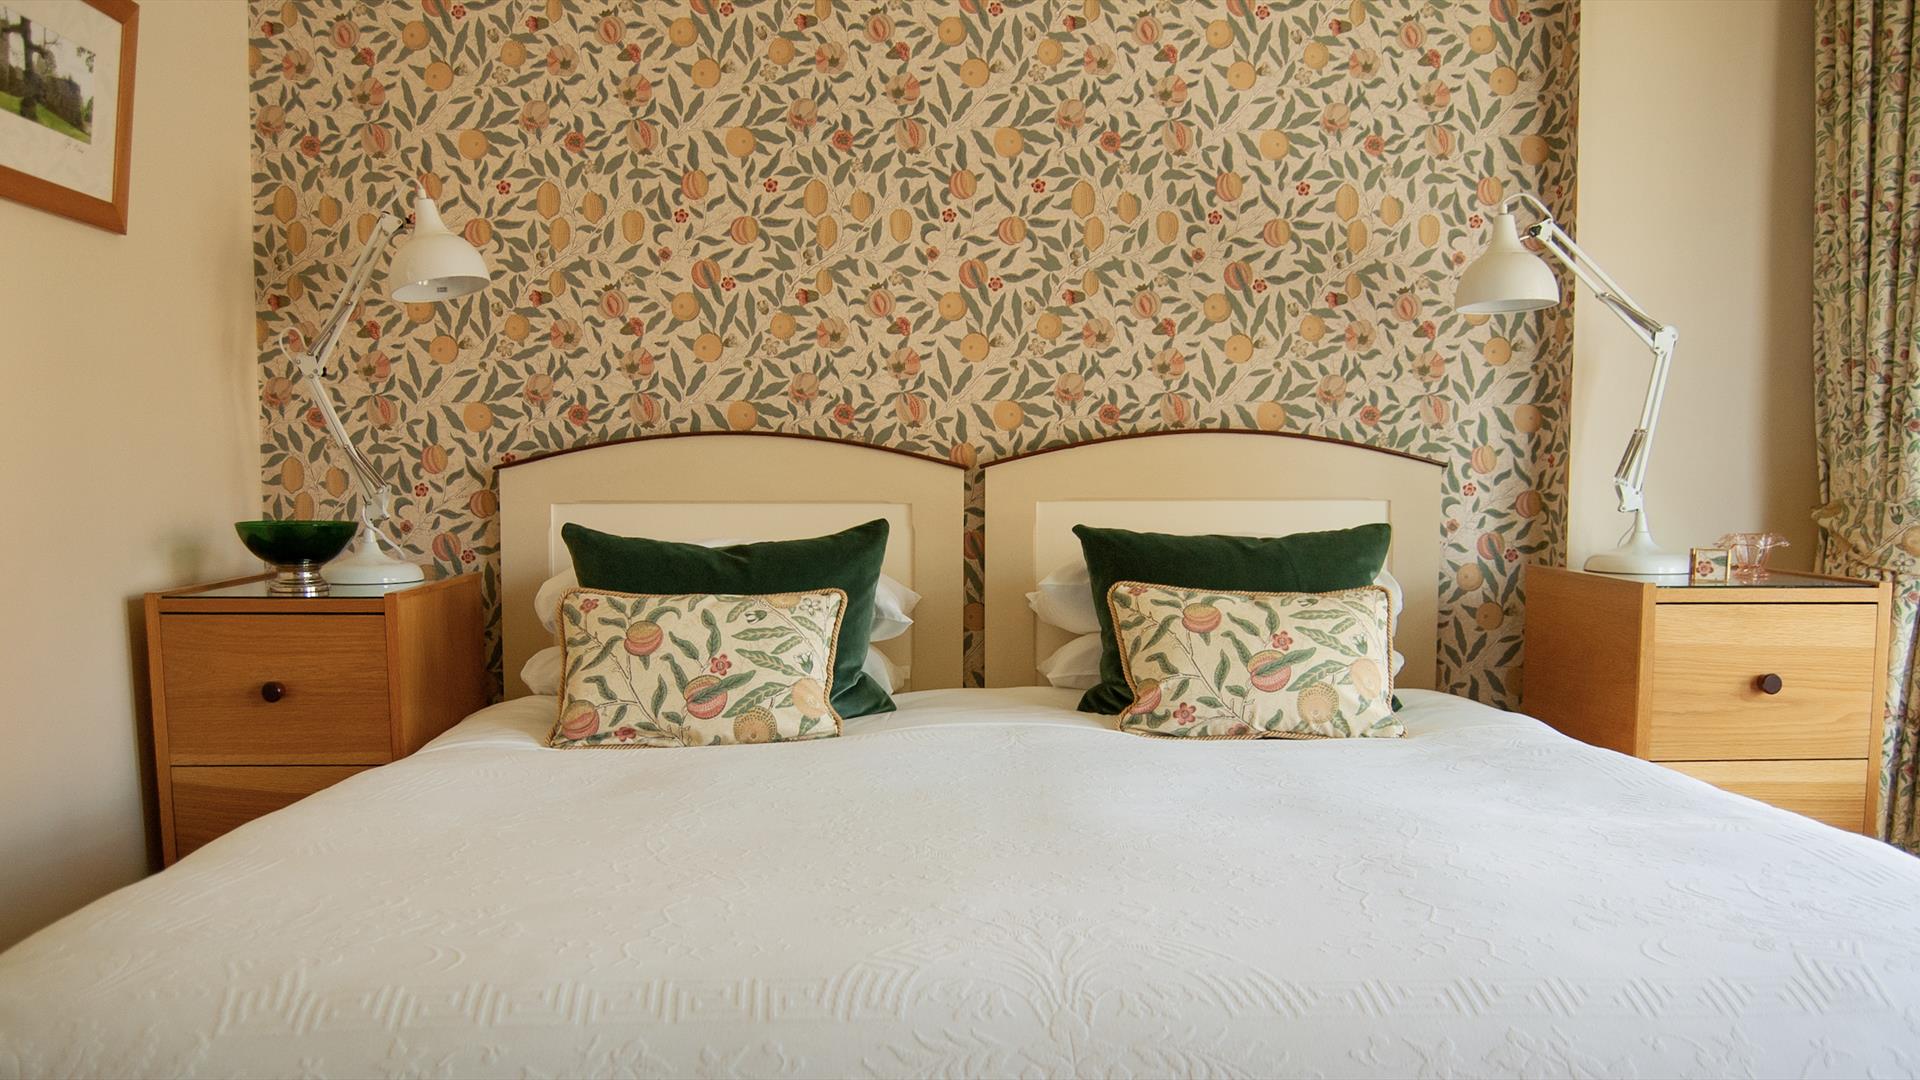 Image of a bed with patterned wall paper and matching cushions.